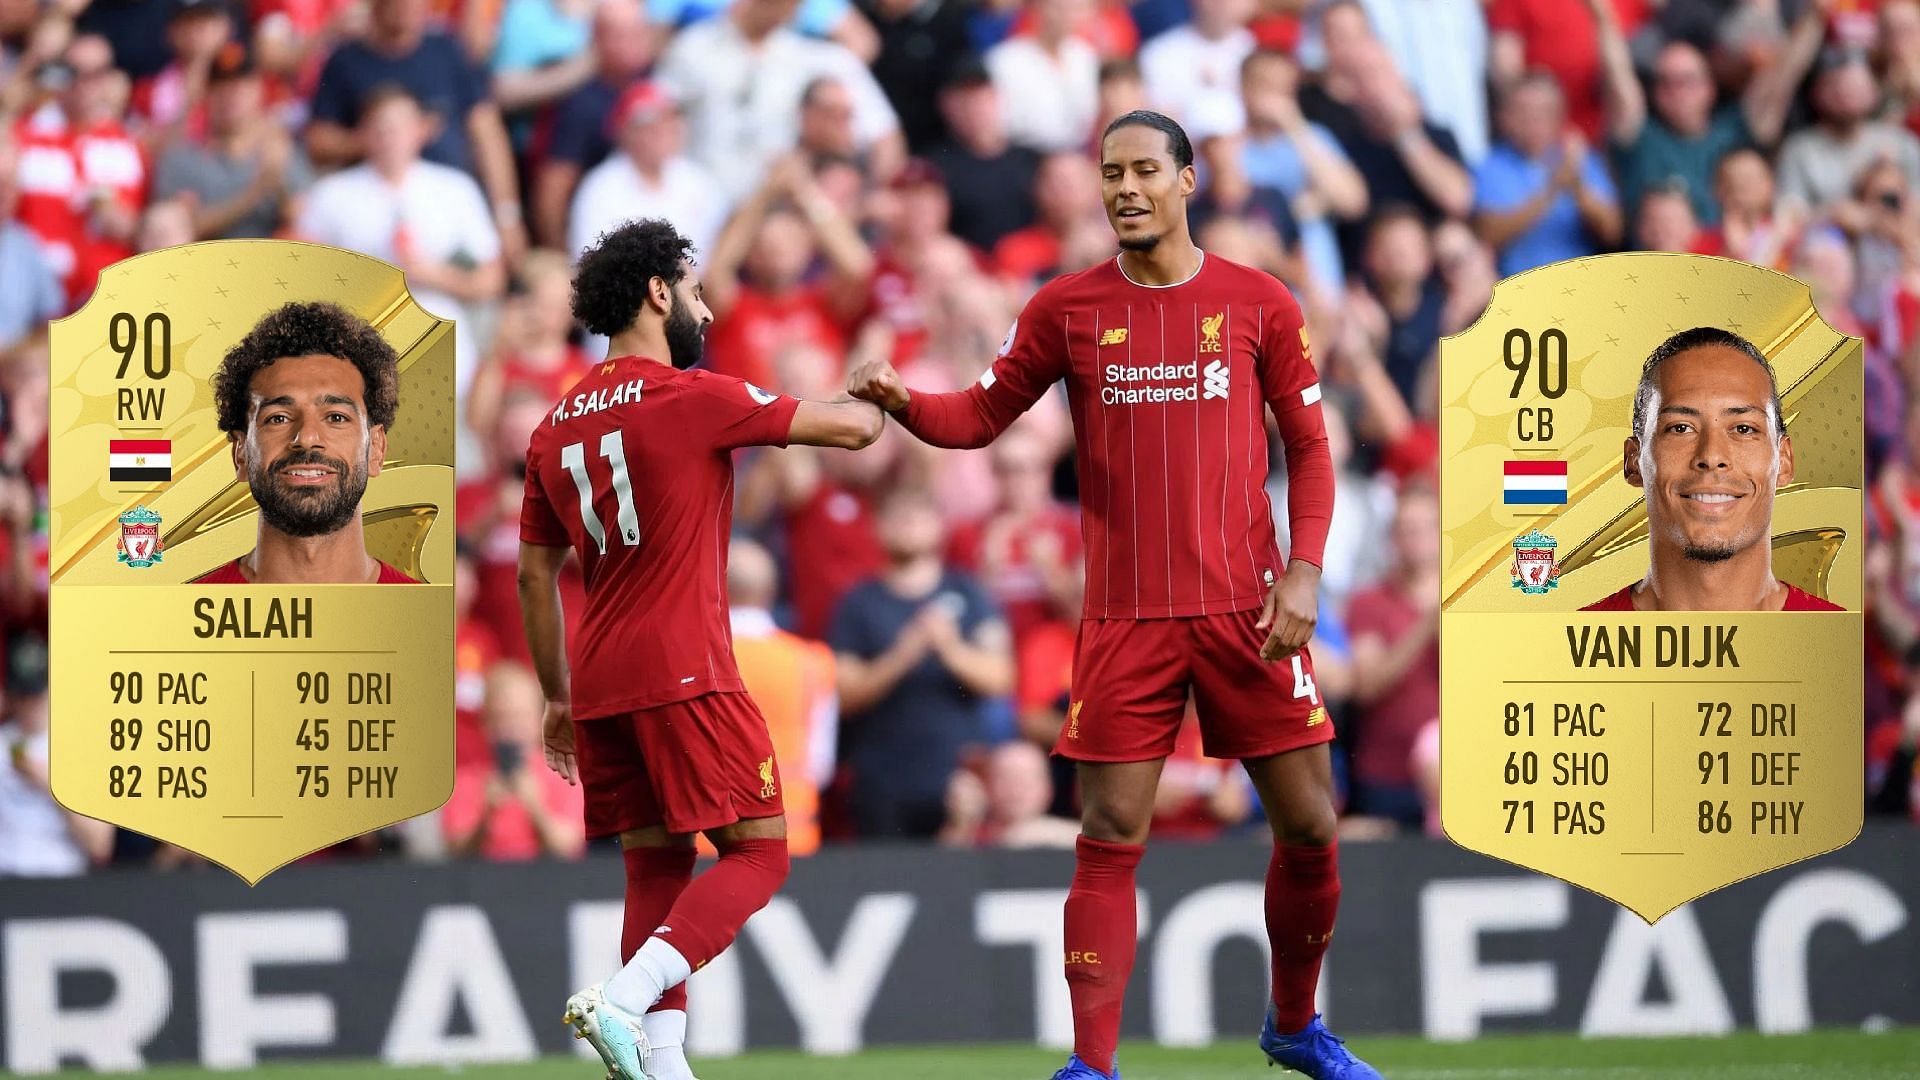 Salah and Van Dijk are the second highest rated cards in the Premier League (Image via Getty))